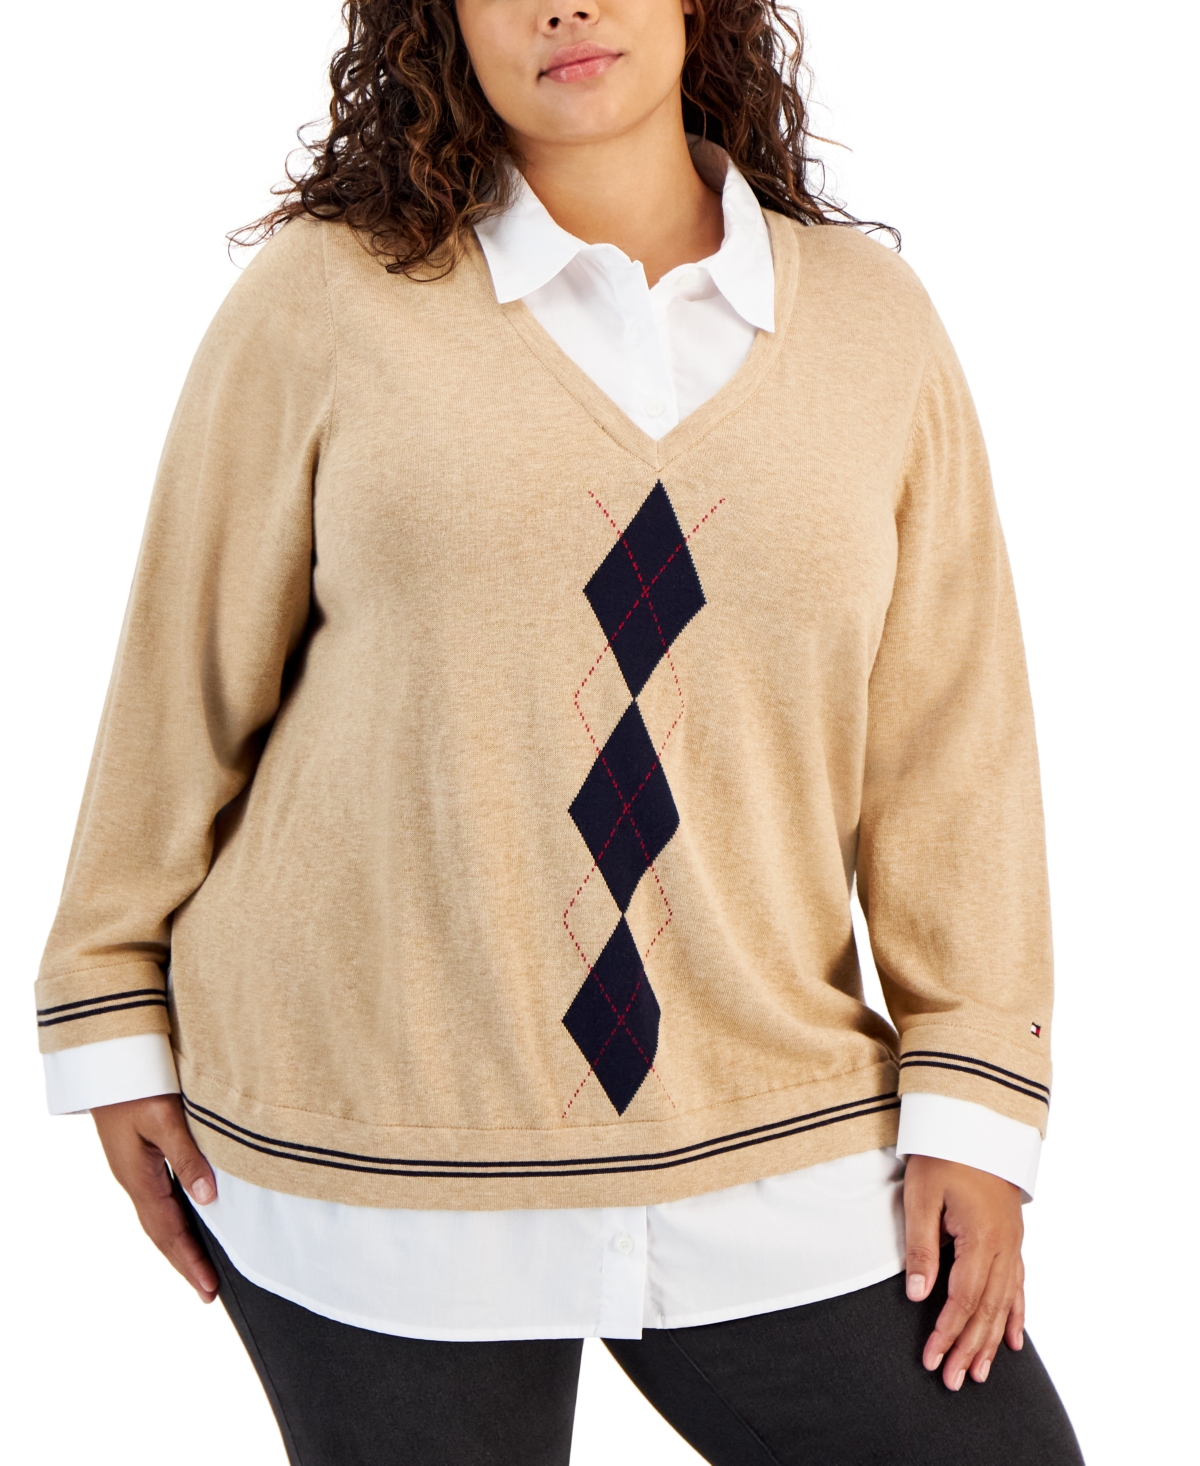 TOMMY HILFIGER PLUS SIZE COTTON LAYERED-LOOK SWEATER